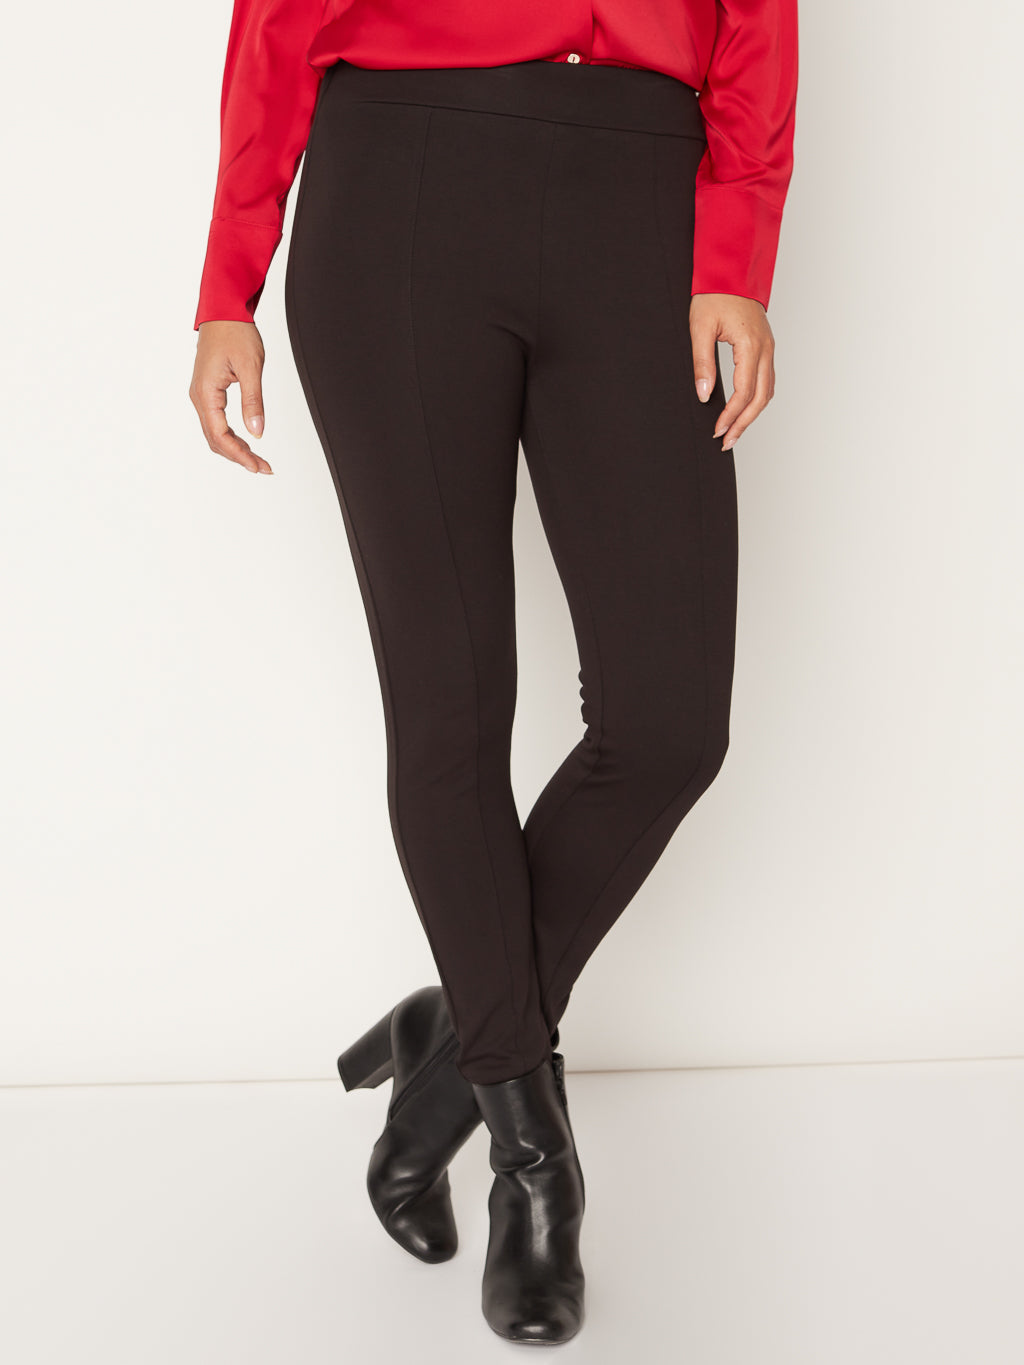 Narrow pull-on ankle pant